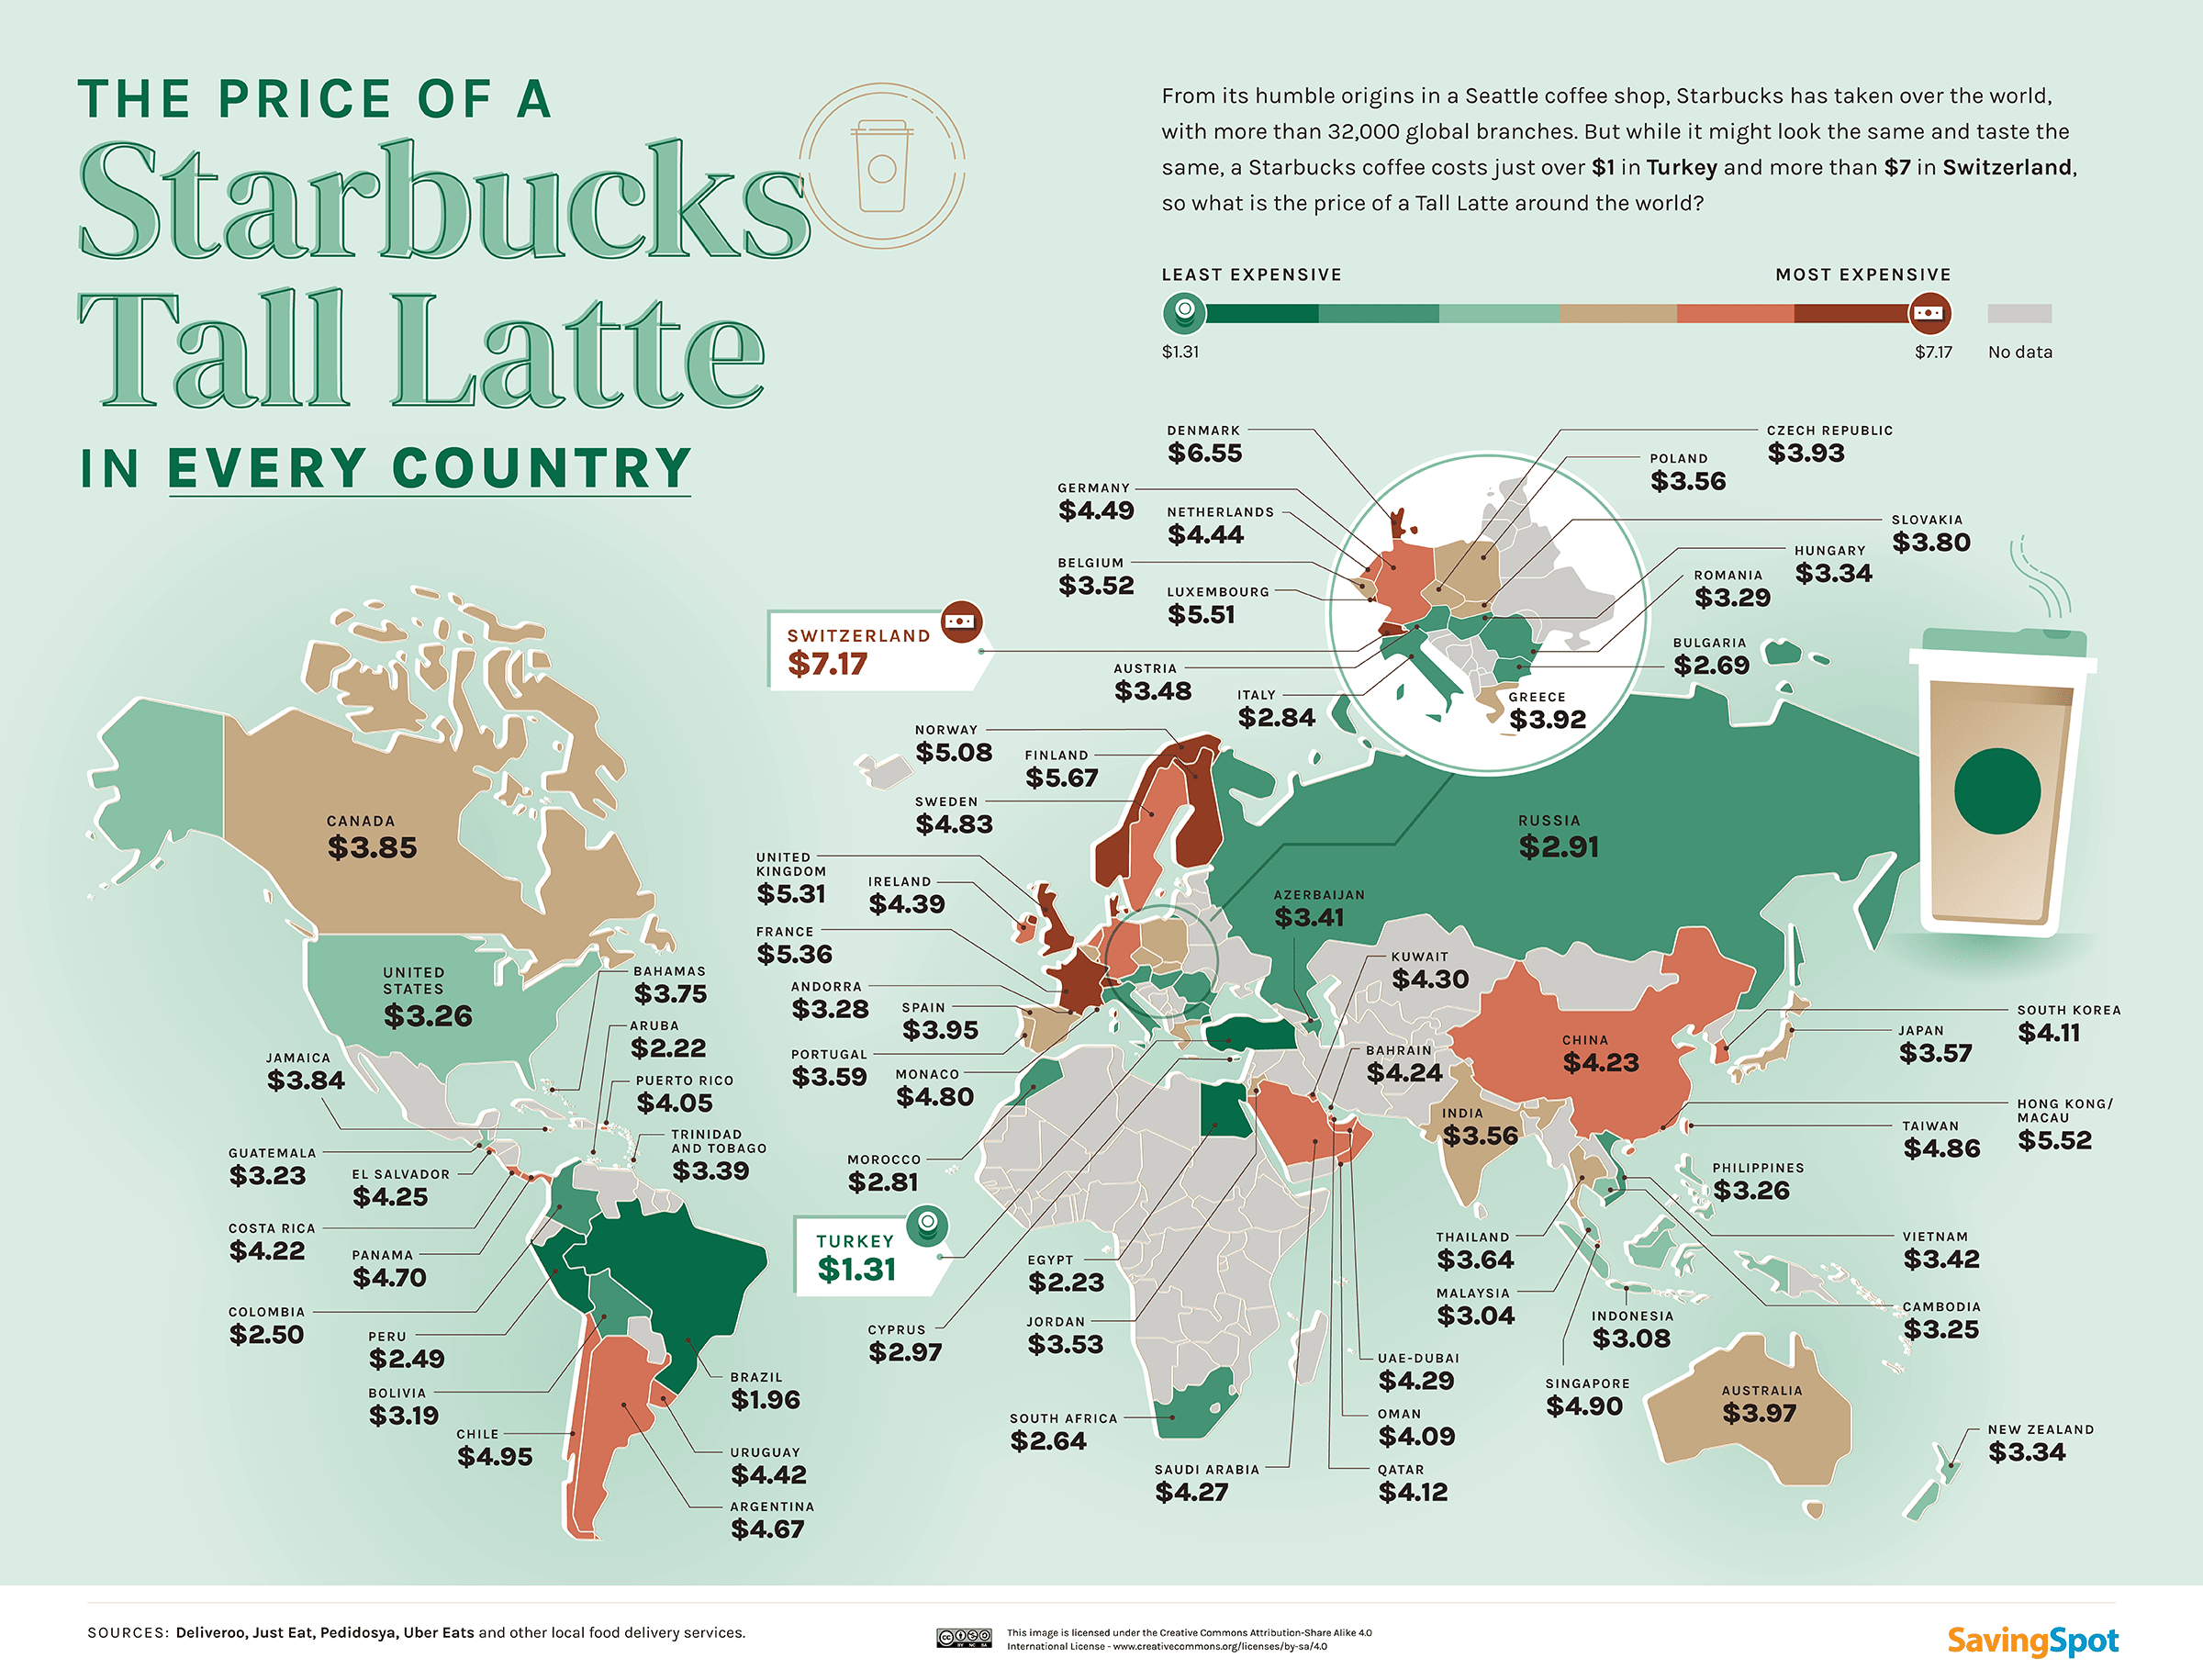 A map of the world with the price of a Starbucks Tall Latte listed against each country.